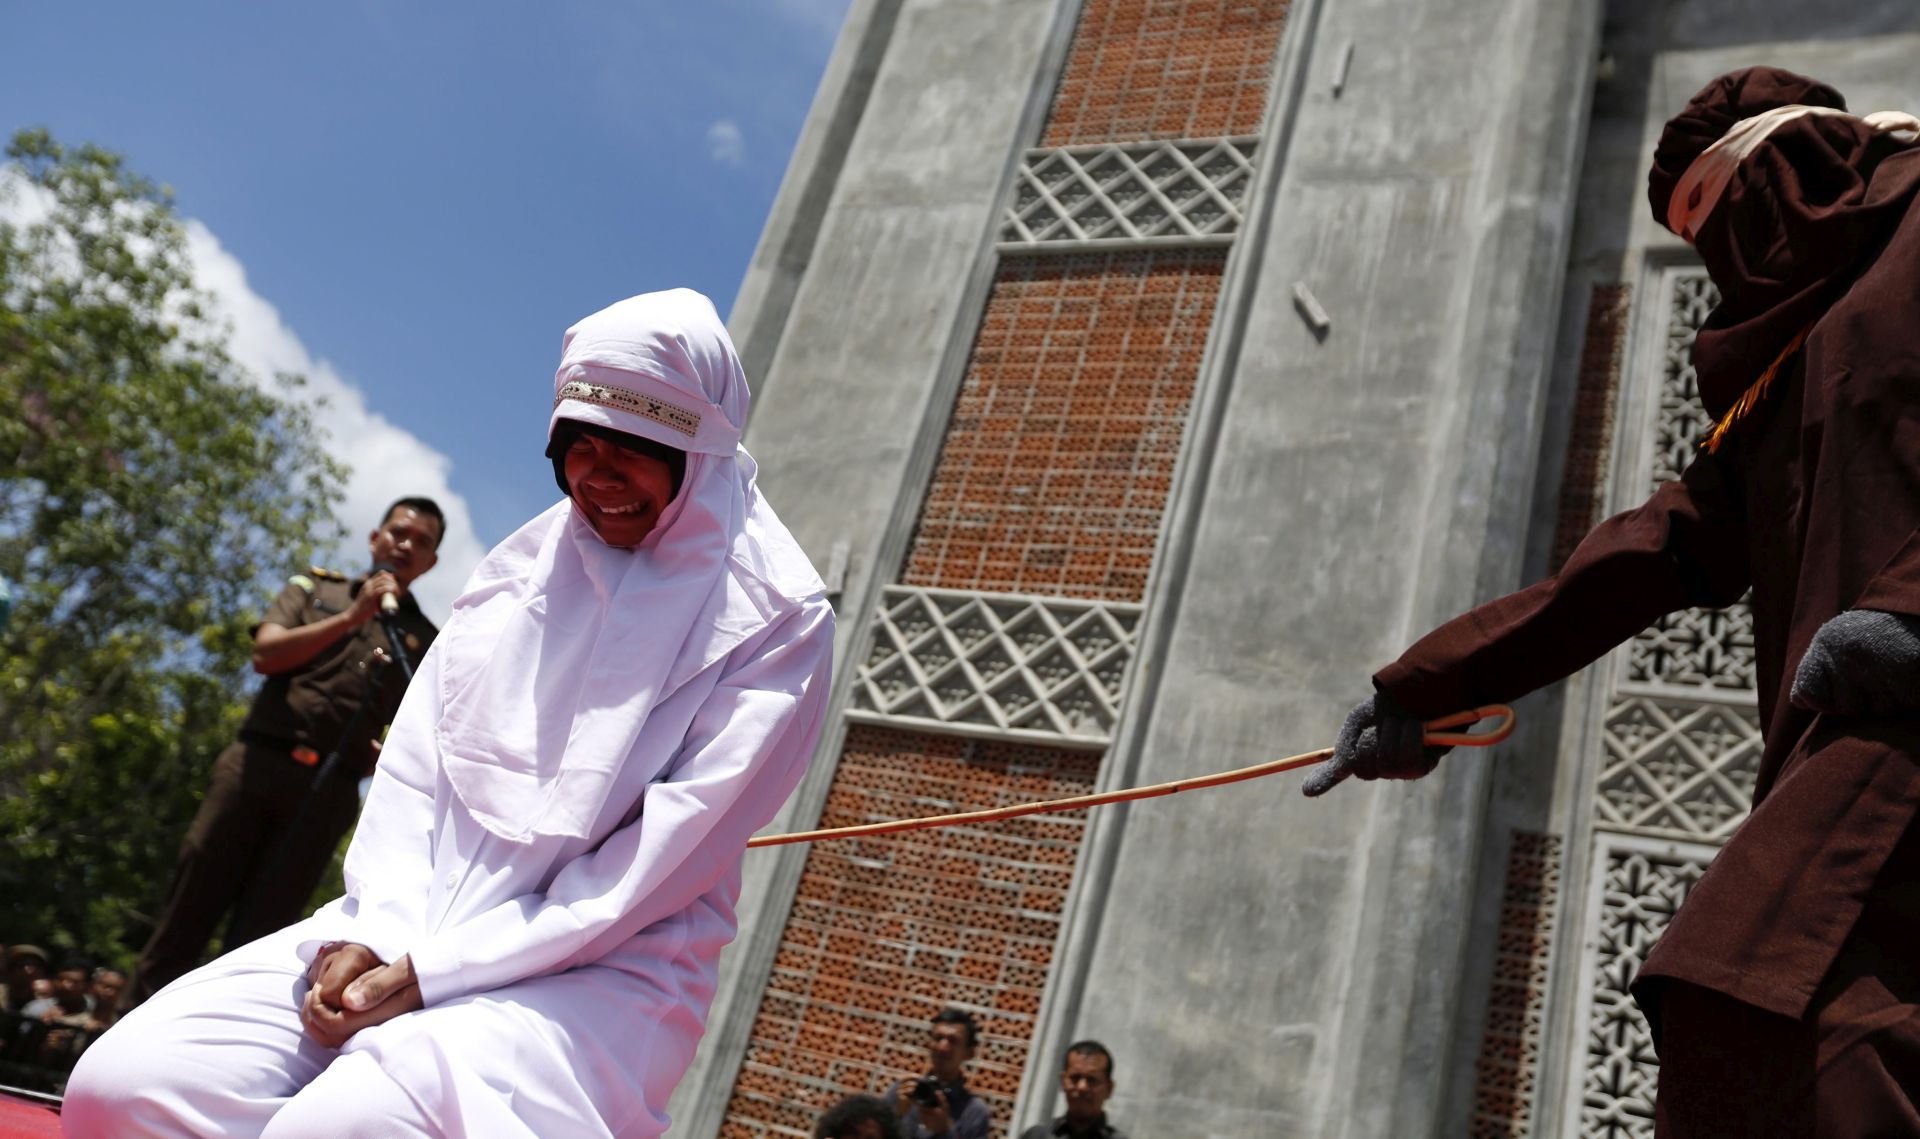 epa05450715 An Acehnese woman is whipped in front of the public at Al Furqon Mosque, Banda Aceh, Indonesia, 01 August 2016. Three Acehnese couples were sentenced to be whipped for violating the sharia law for dating between a man and a woman, a violation of sharia law. Whipping is one form of punishment imposed in Aceh for violating Islamic Sharia law.  EPA/HOTLI SIMANJUNTAK